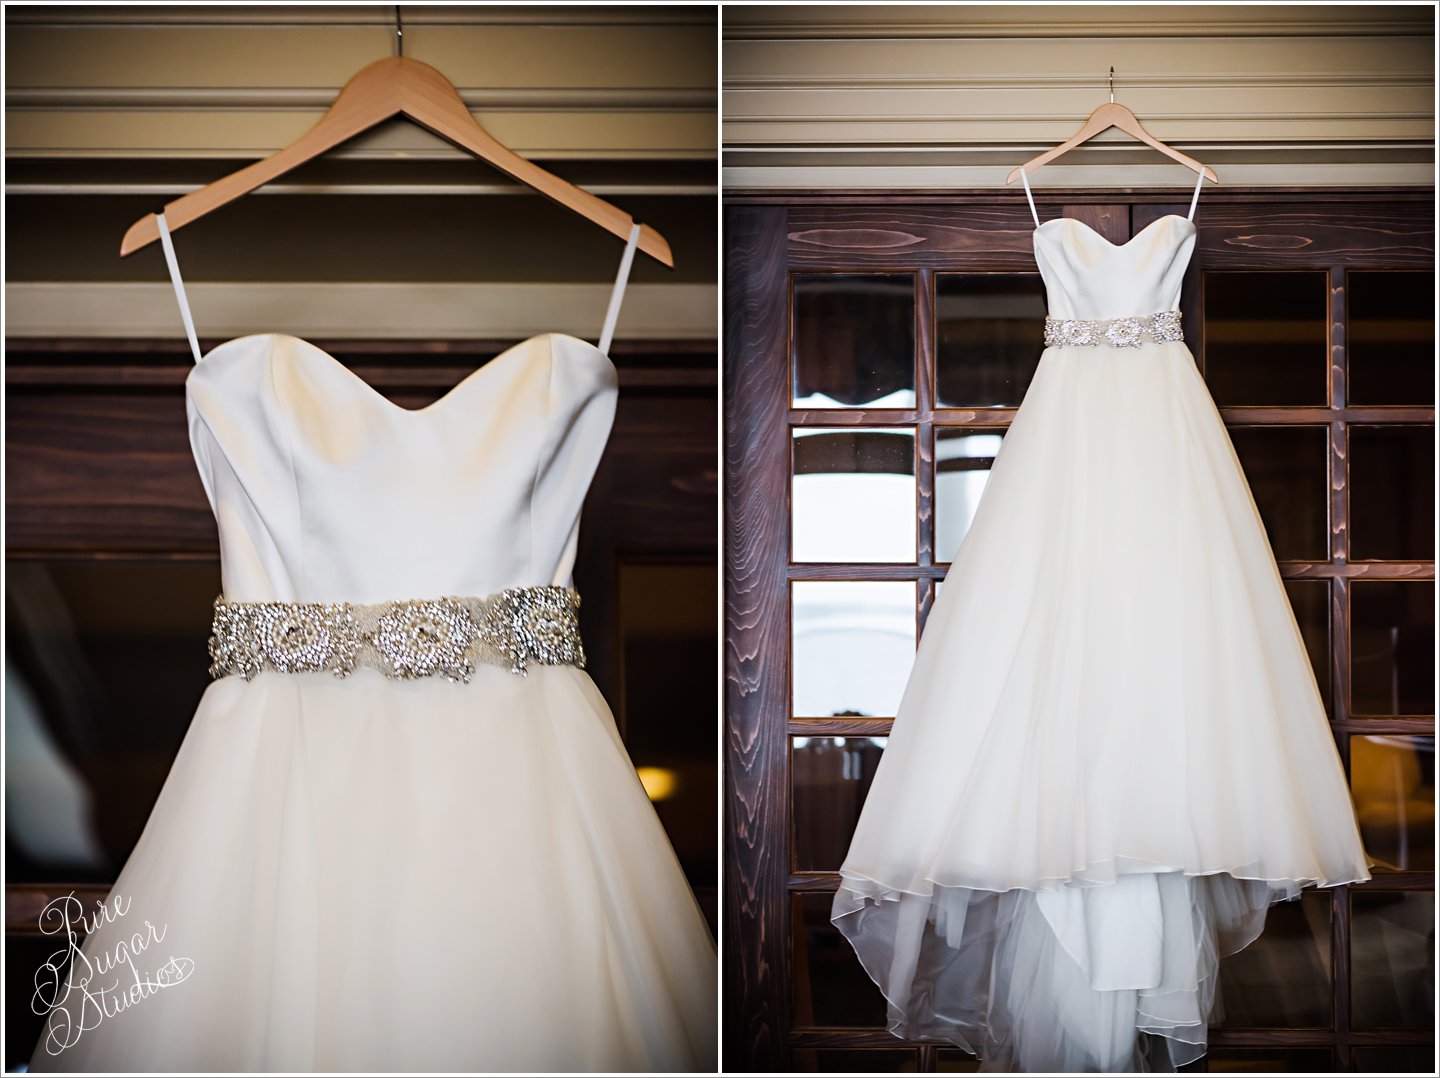  "Legends" by Romona keveza dress from Calvet Couture Bridal at Timuquana Country Club Wedding